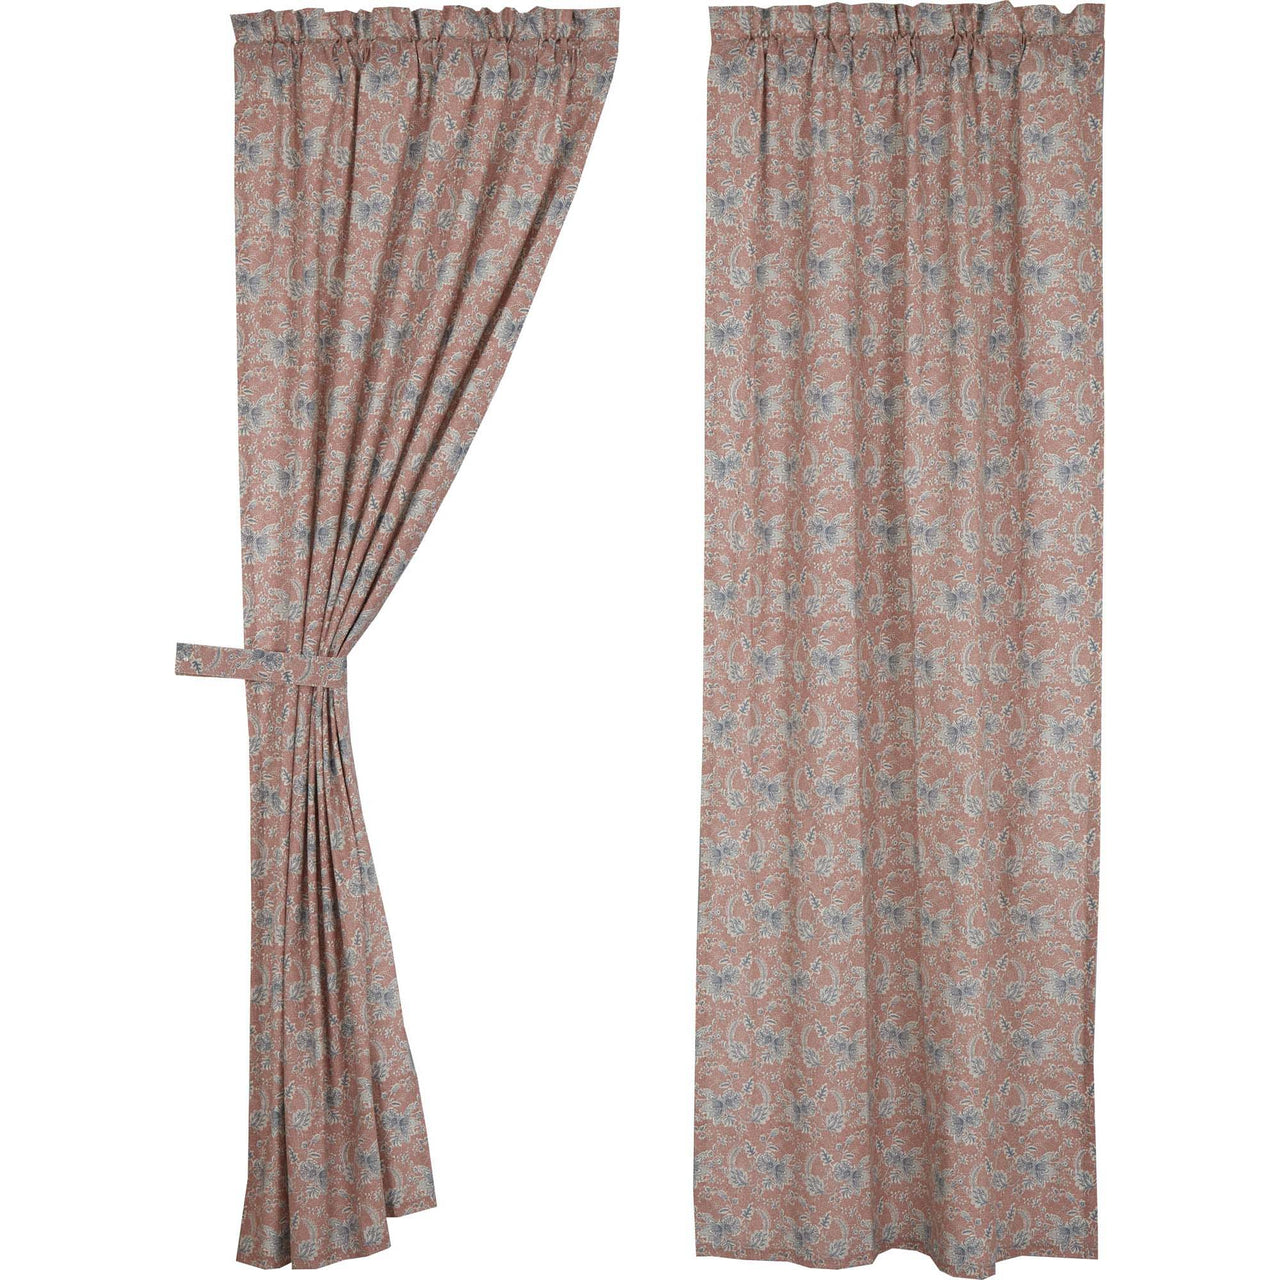 Kaila Floral Panel Set of 2 84x40 VHC Brands